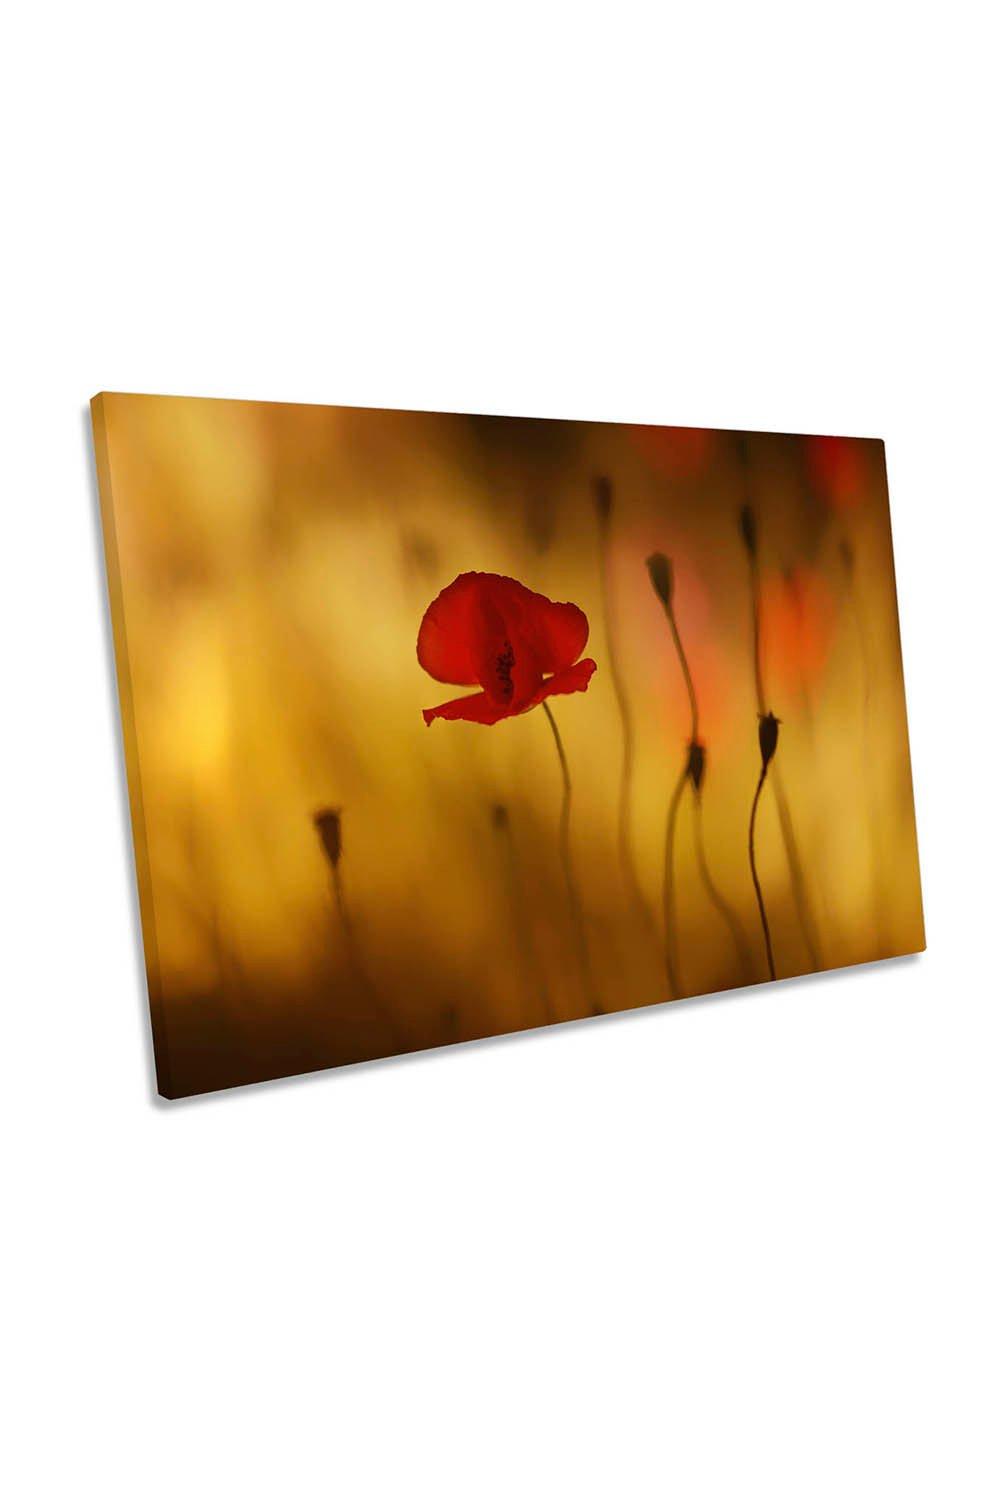 Red Poppy Sunset Flowers Floral Canvas Wall Art Picture Print